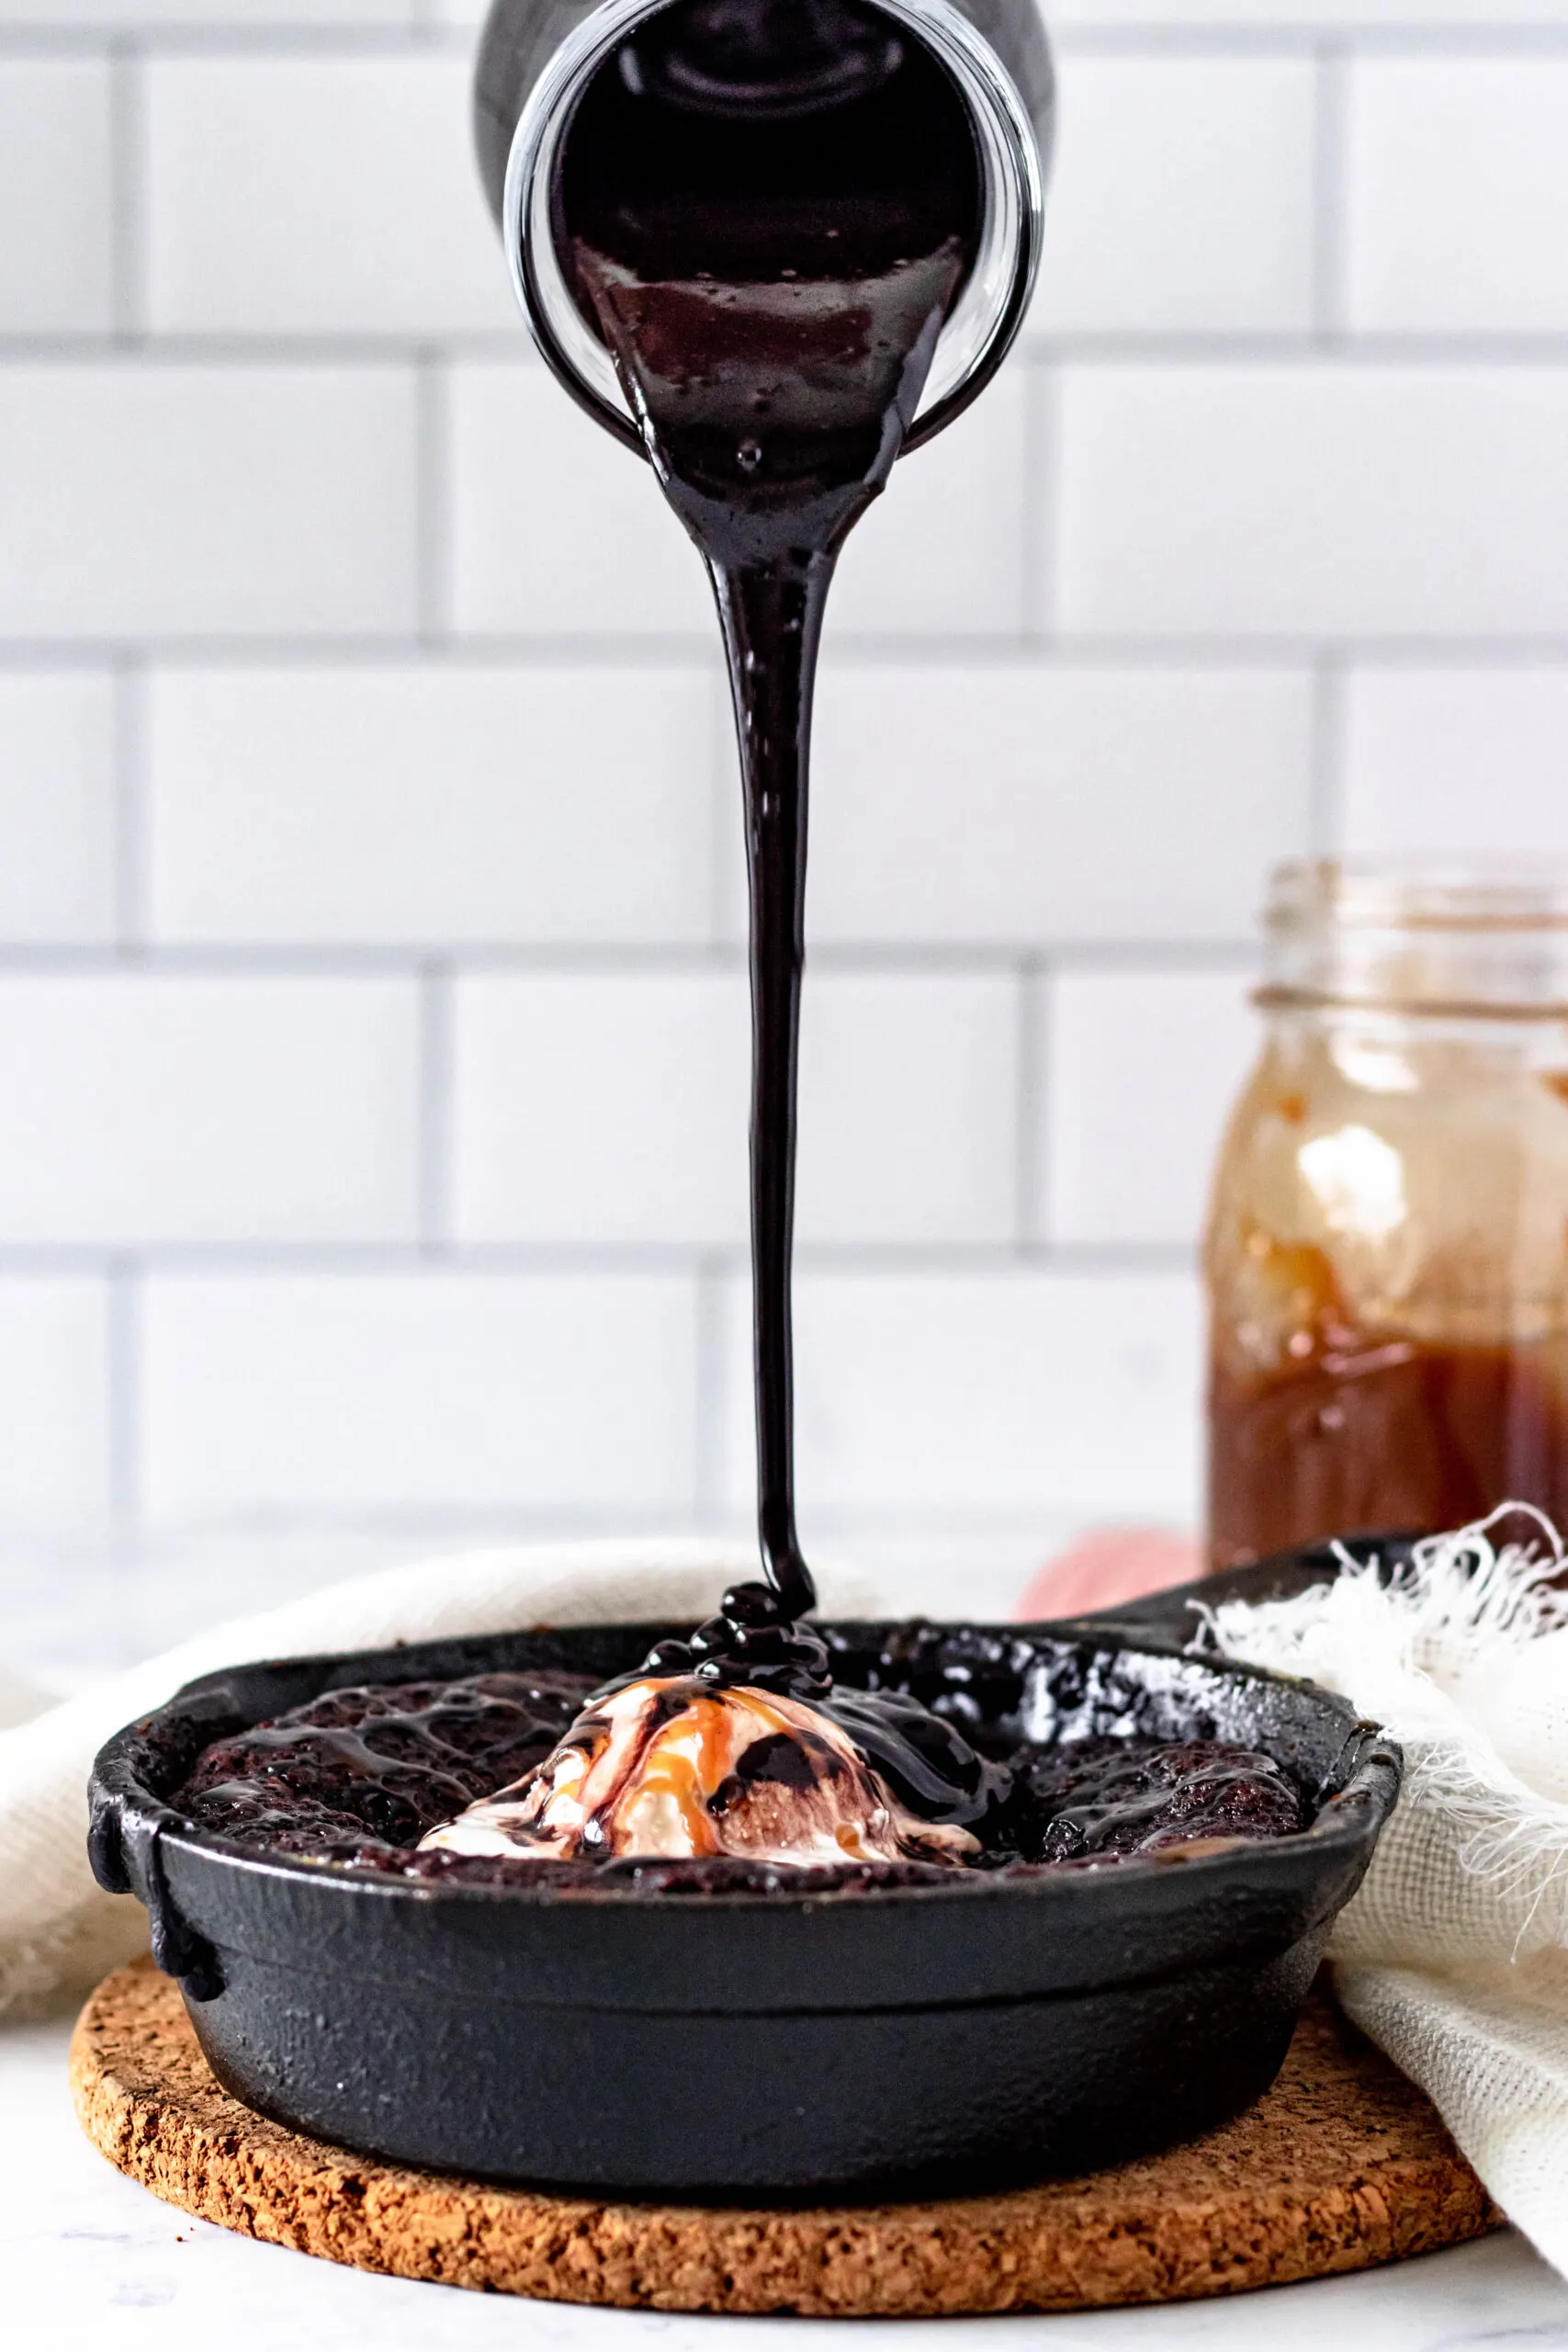 chocolate syrup pouring onto the hot fudge cake